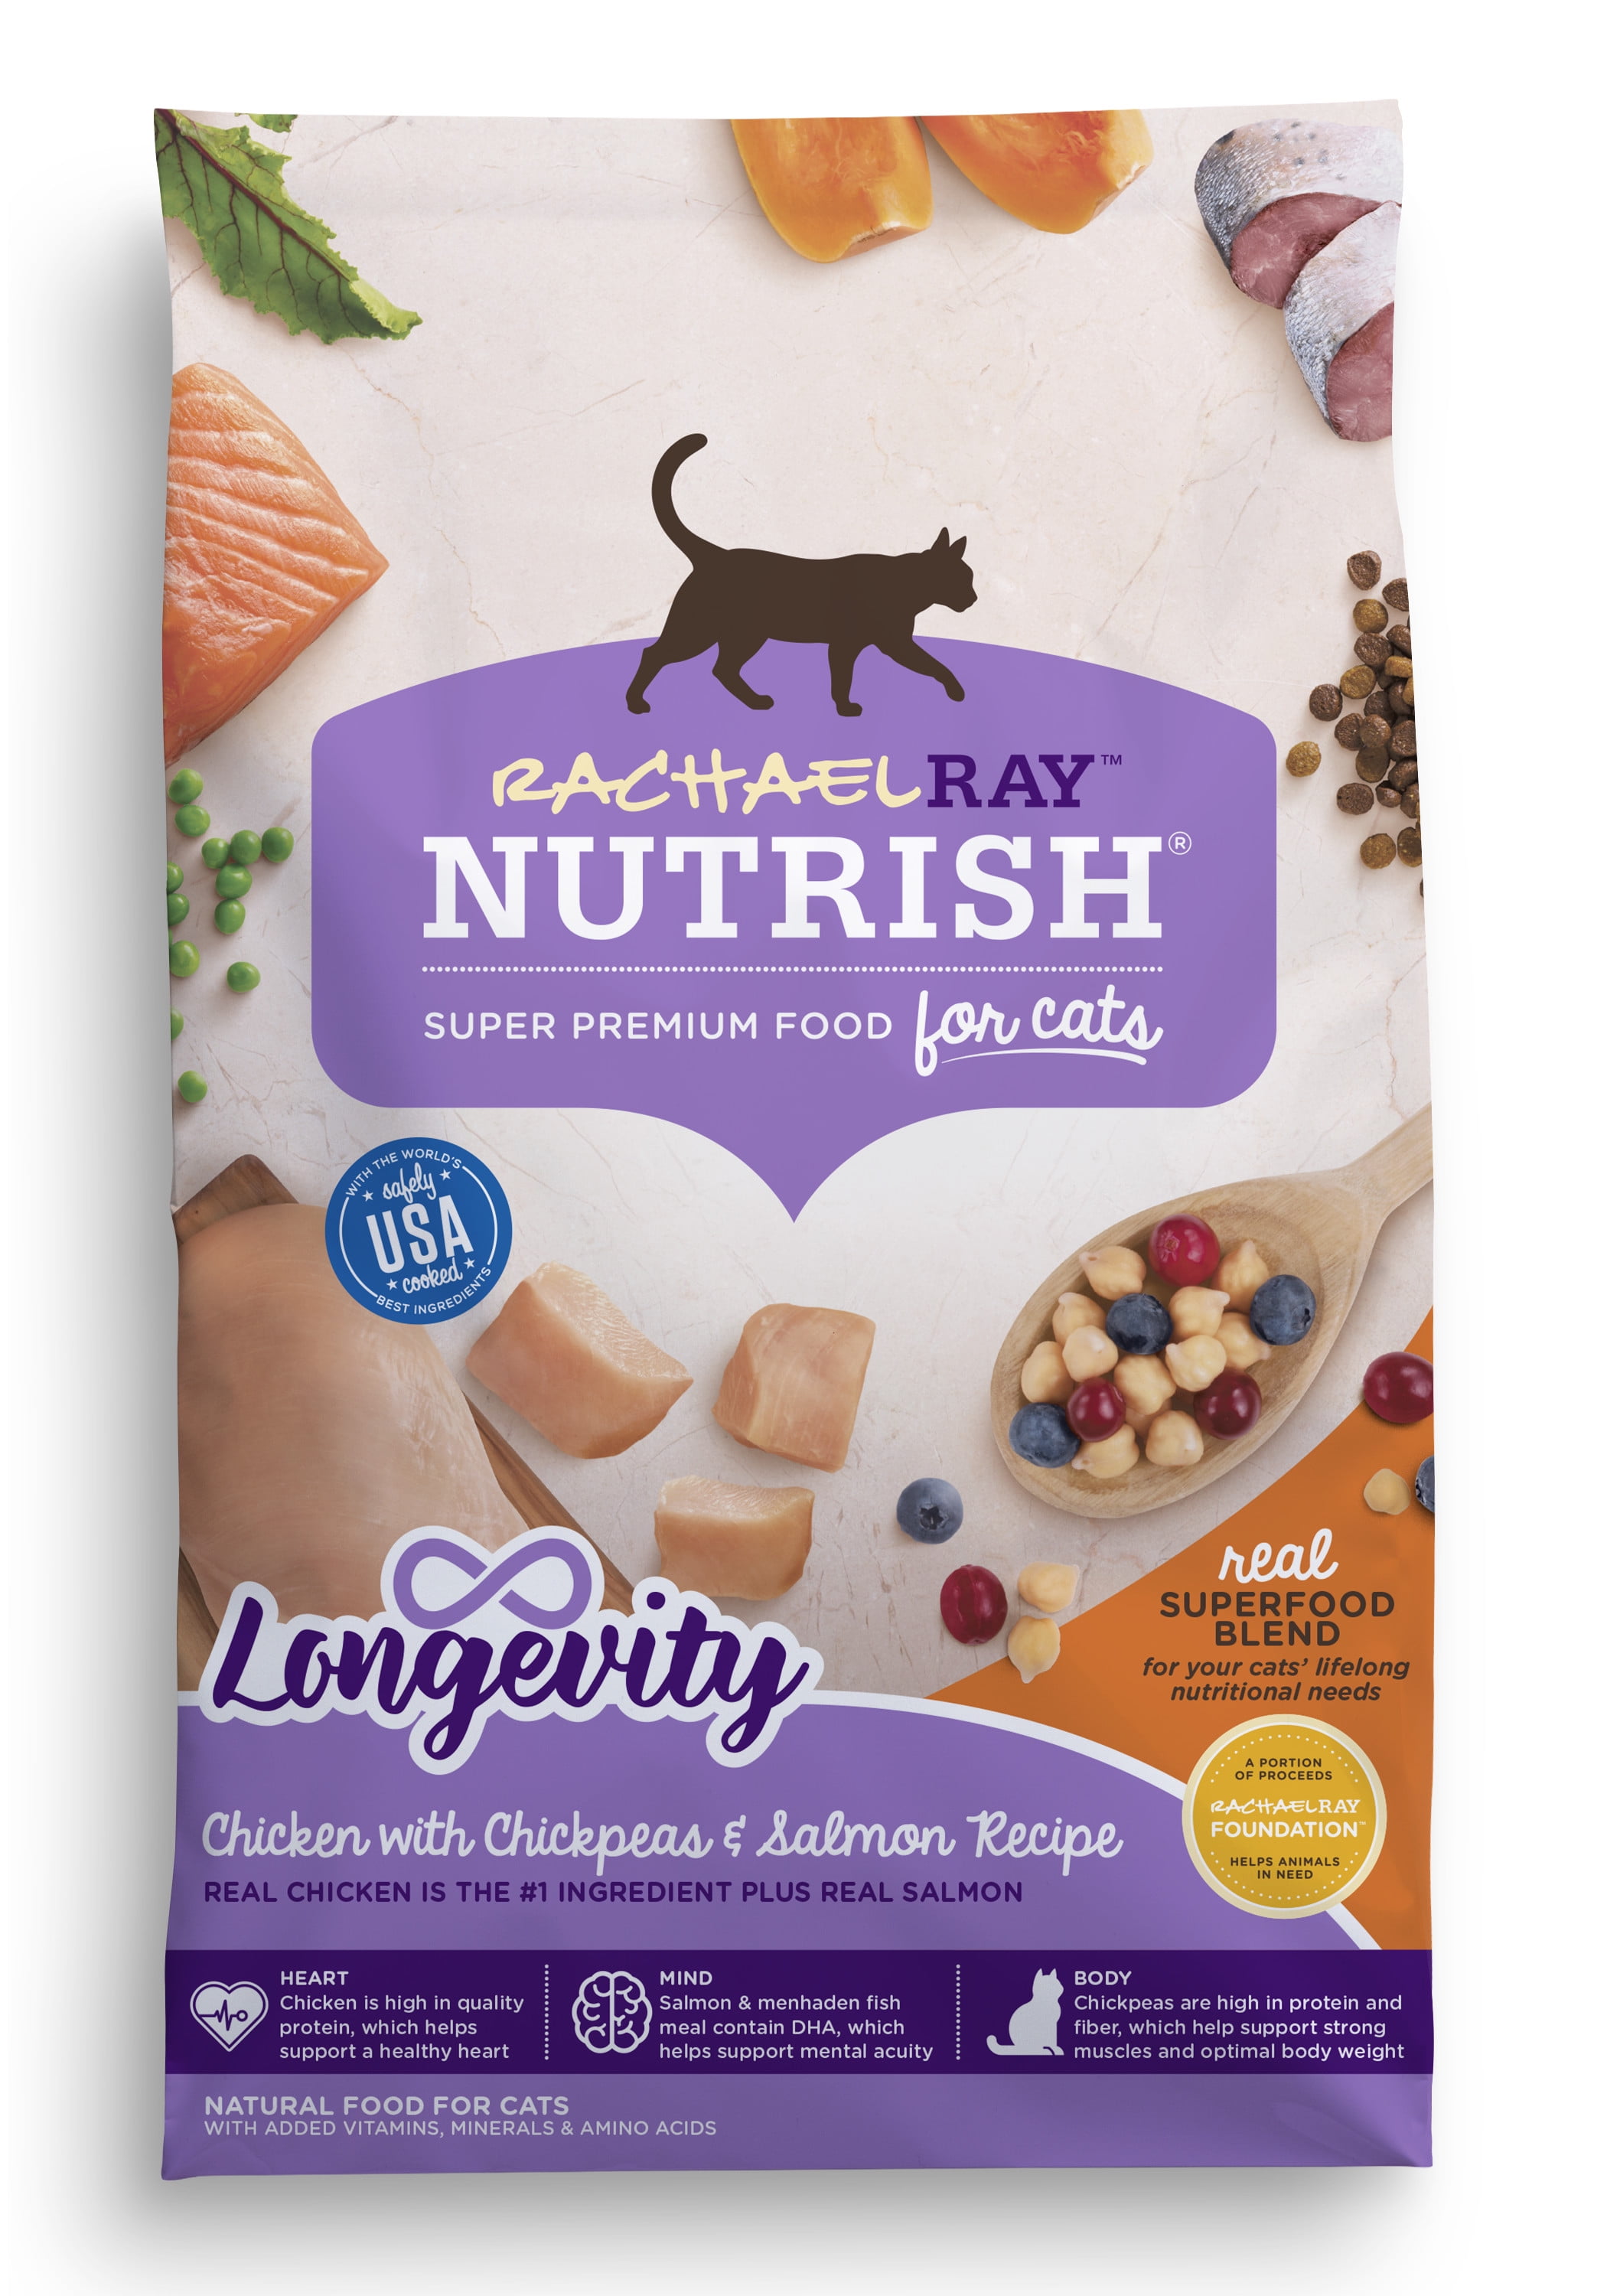 Photo 1 of Rachael Ray Nutrish Longevity Natural Chicken with Chickpeas & Salmon Recipe Dry Cat Food - 3lb EXP OCT 2021